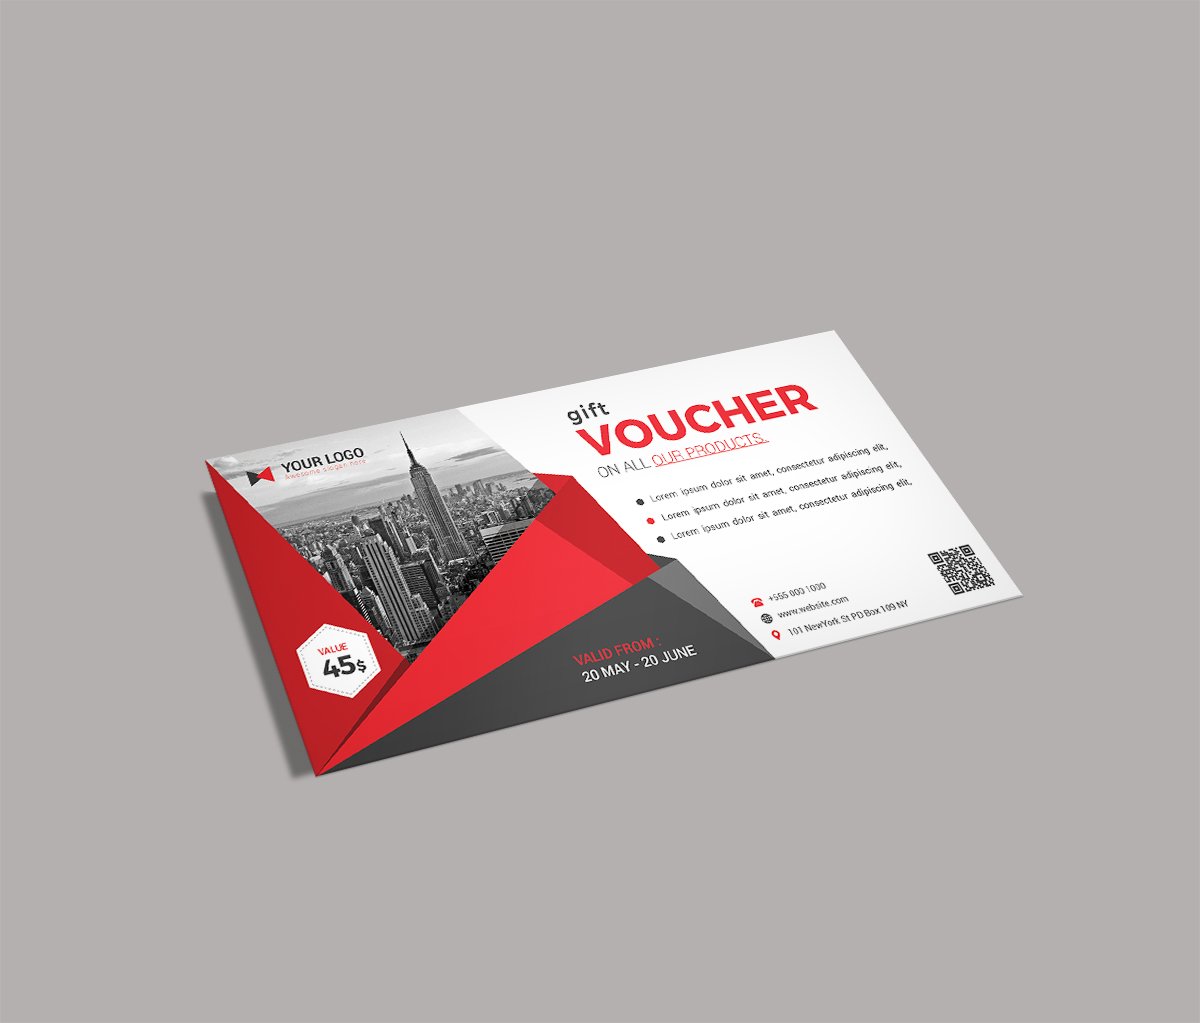 Gift Voucher preview image.